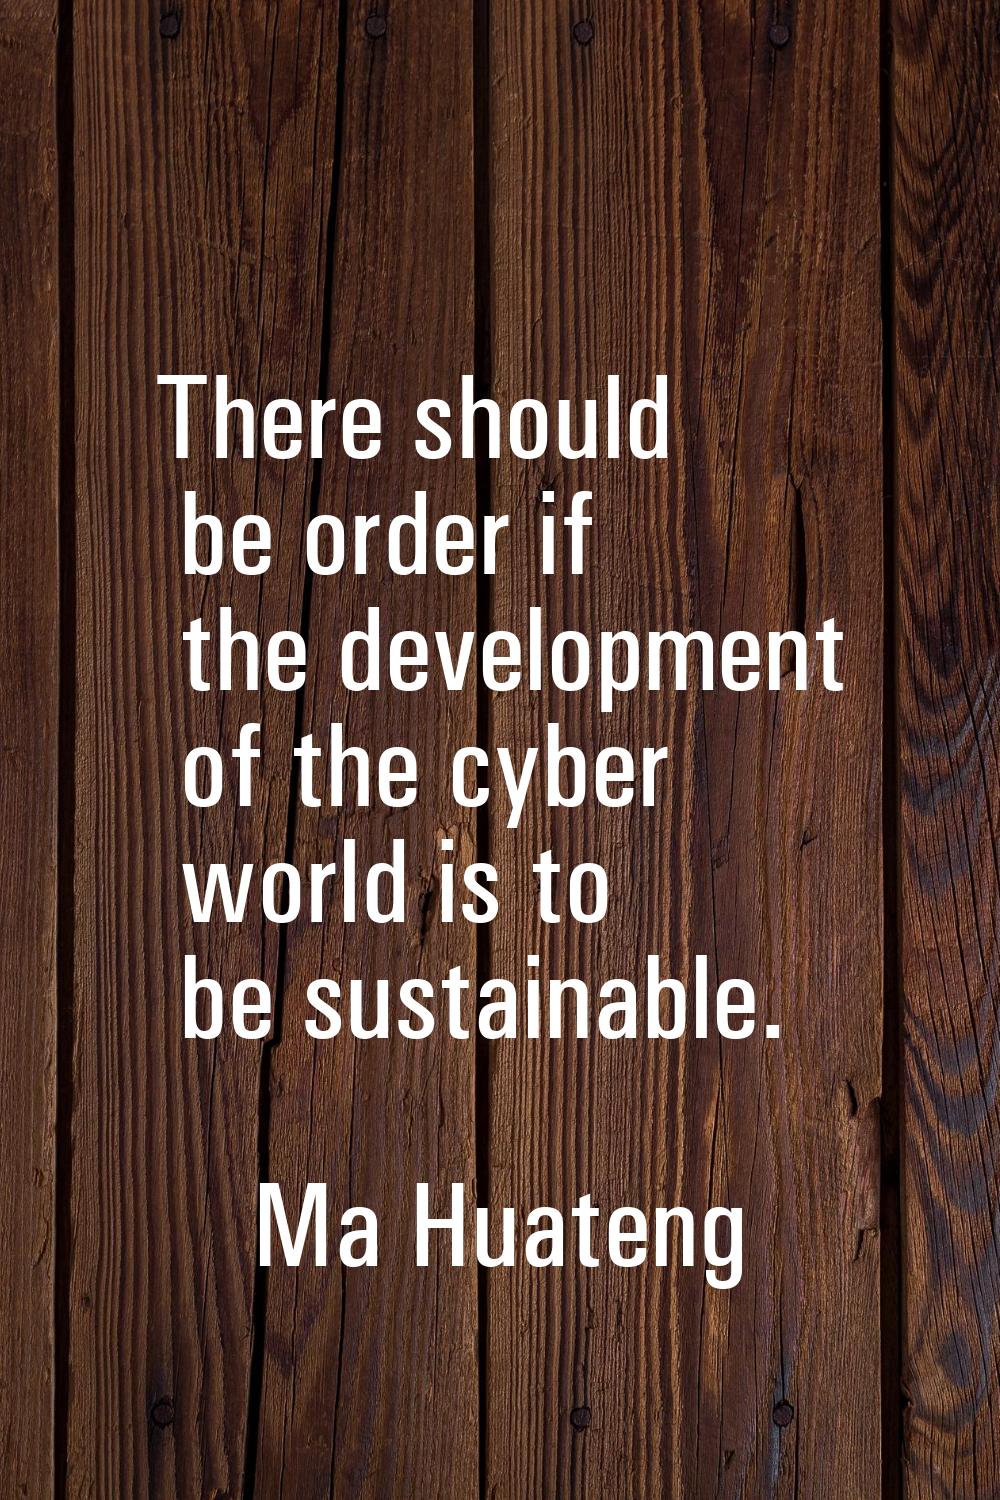 There should be order if the development of the cyber world is to be sustainable.